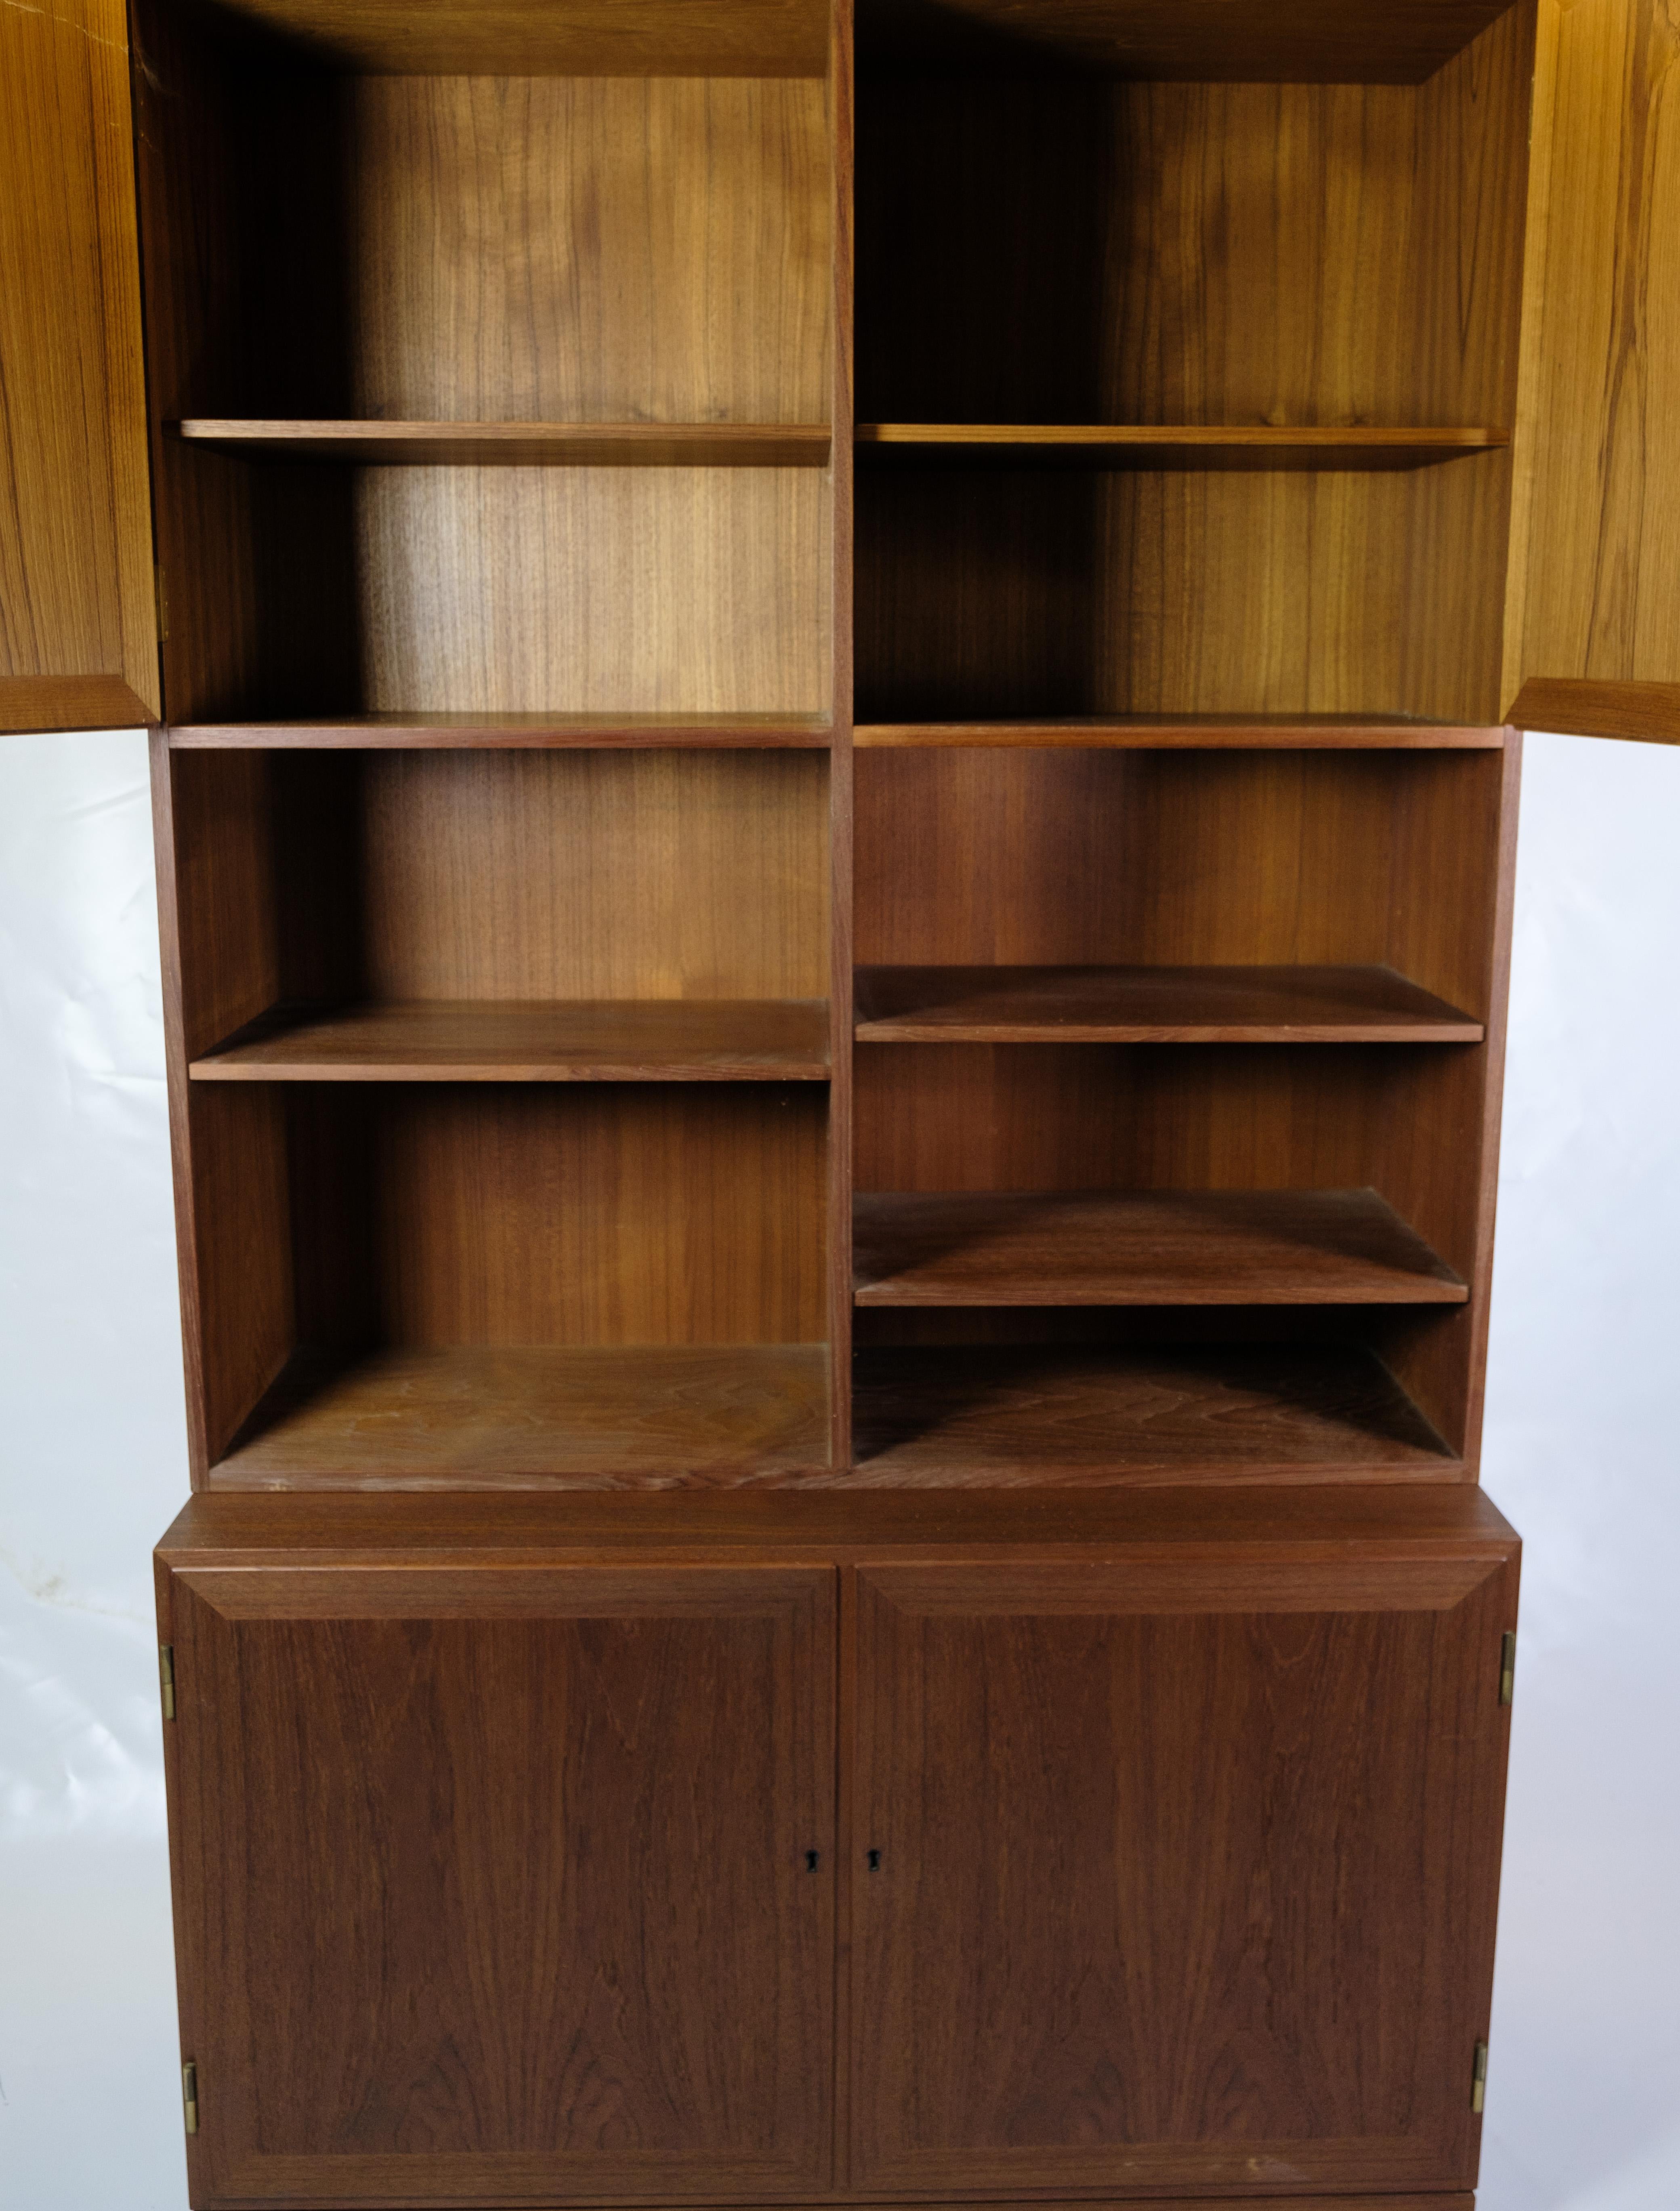 Mid-20th Century Bookcase Made In Teak, Danish design From 1960s For Sale